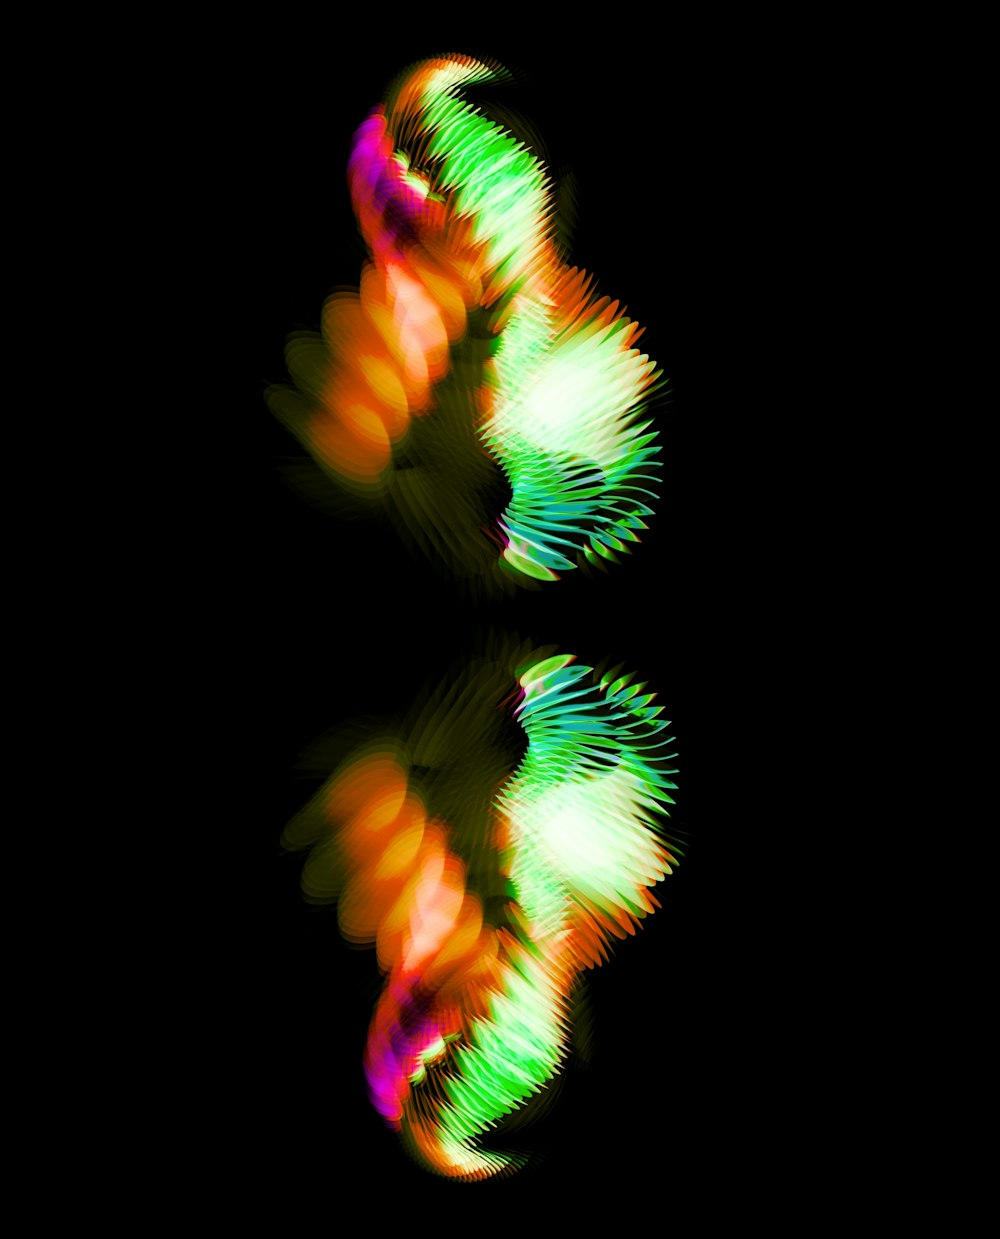 a blurry image of colorful lights on a black background